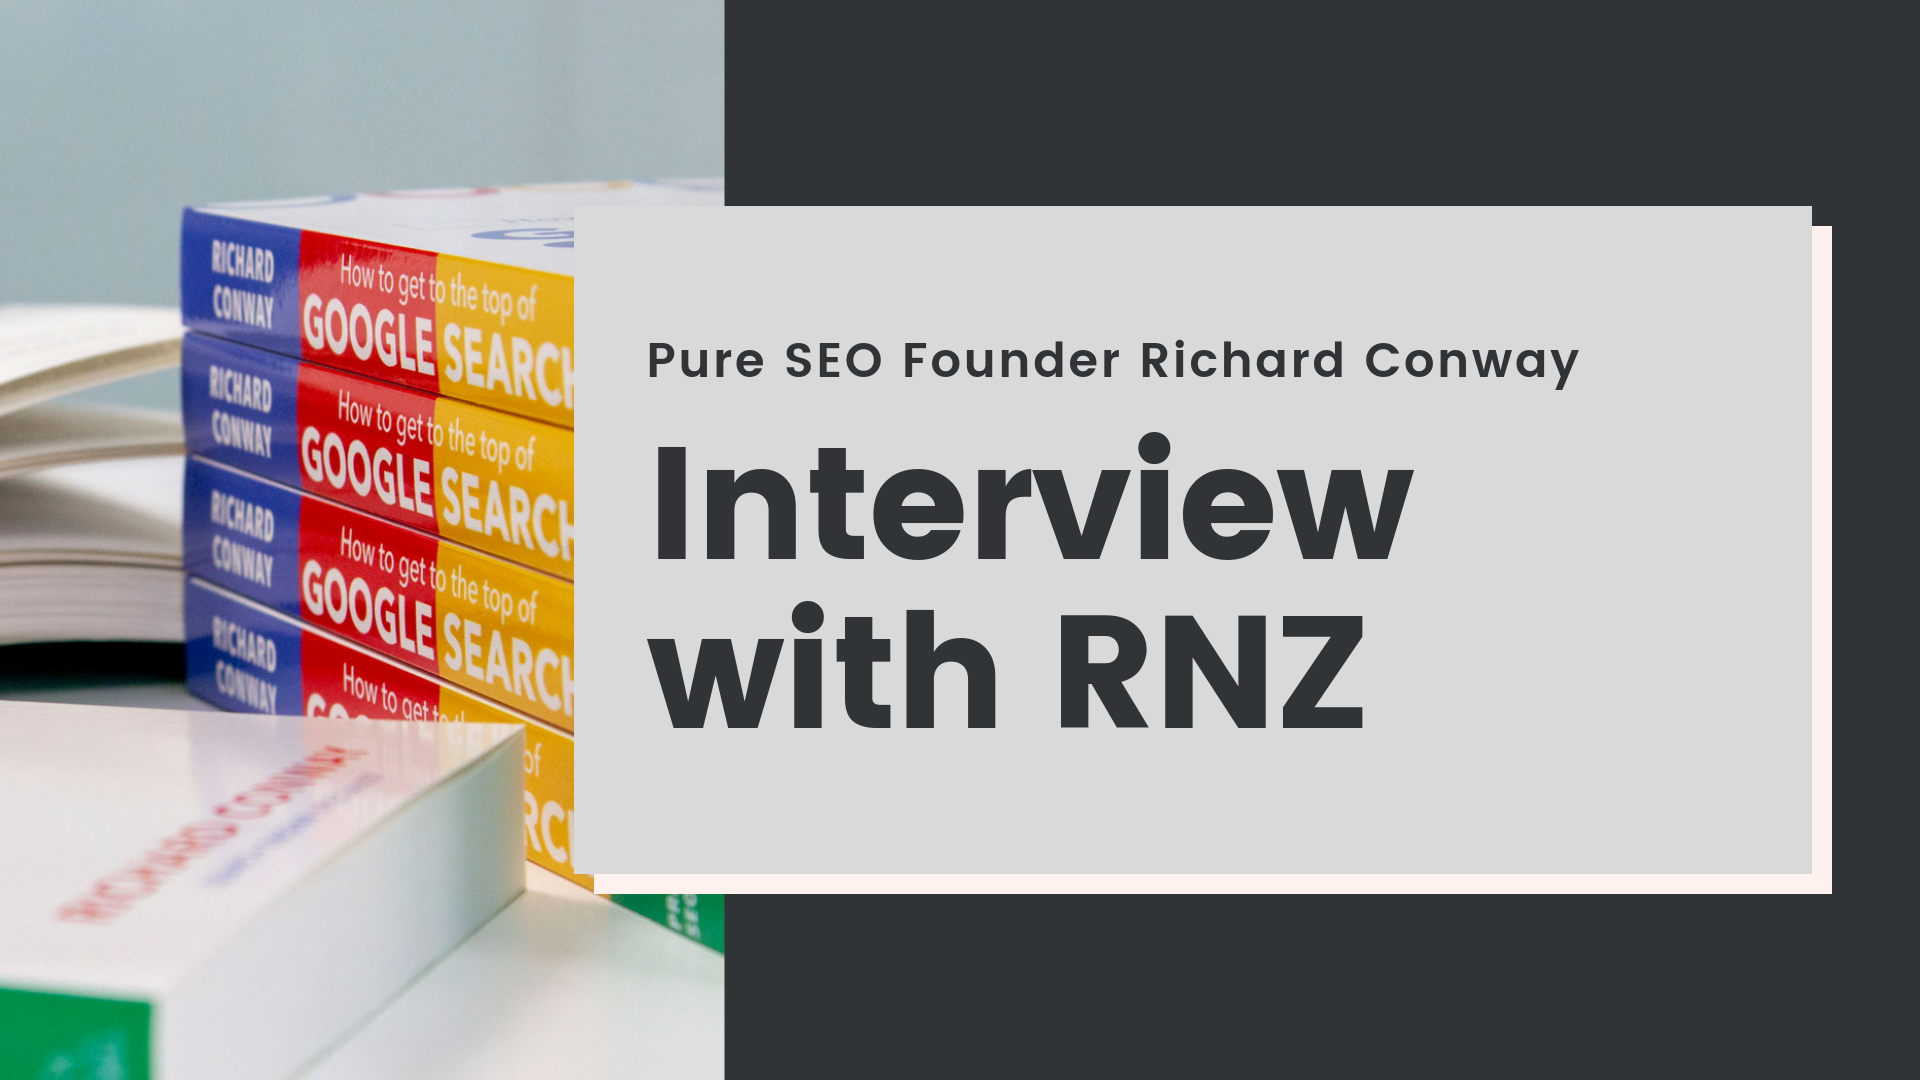 Pure SEO Founder Richard Conway Interviewed by RNZ